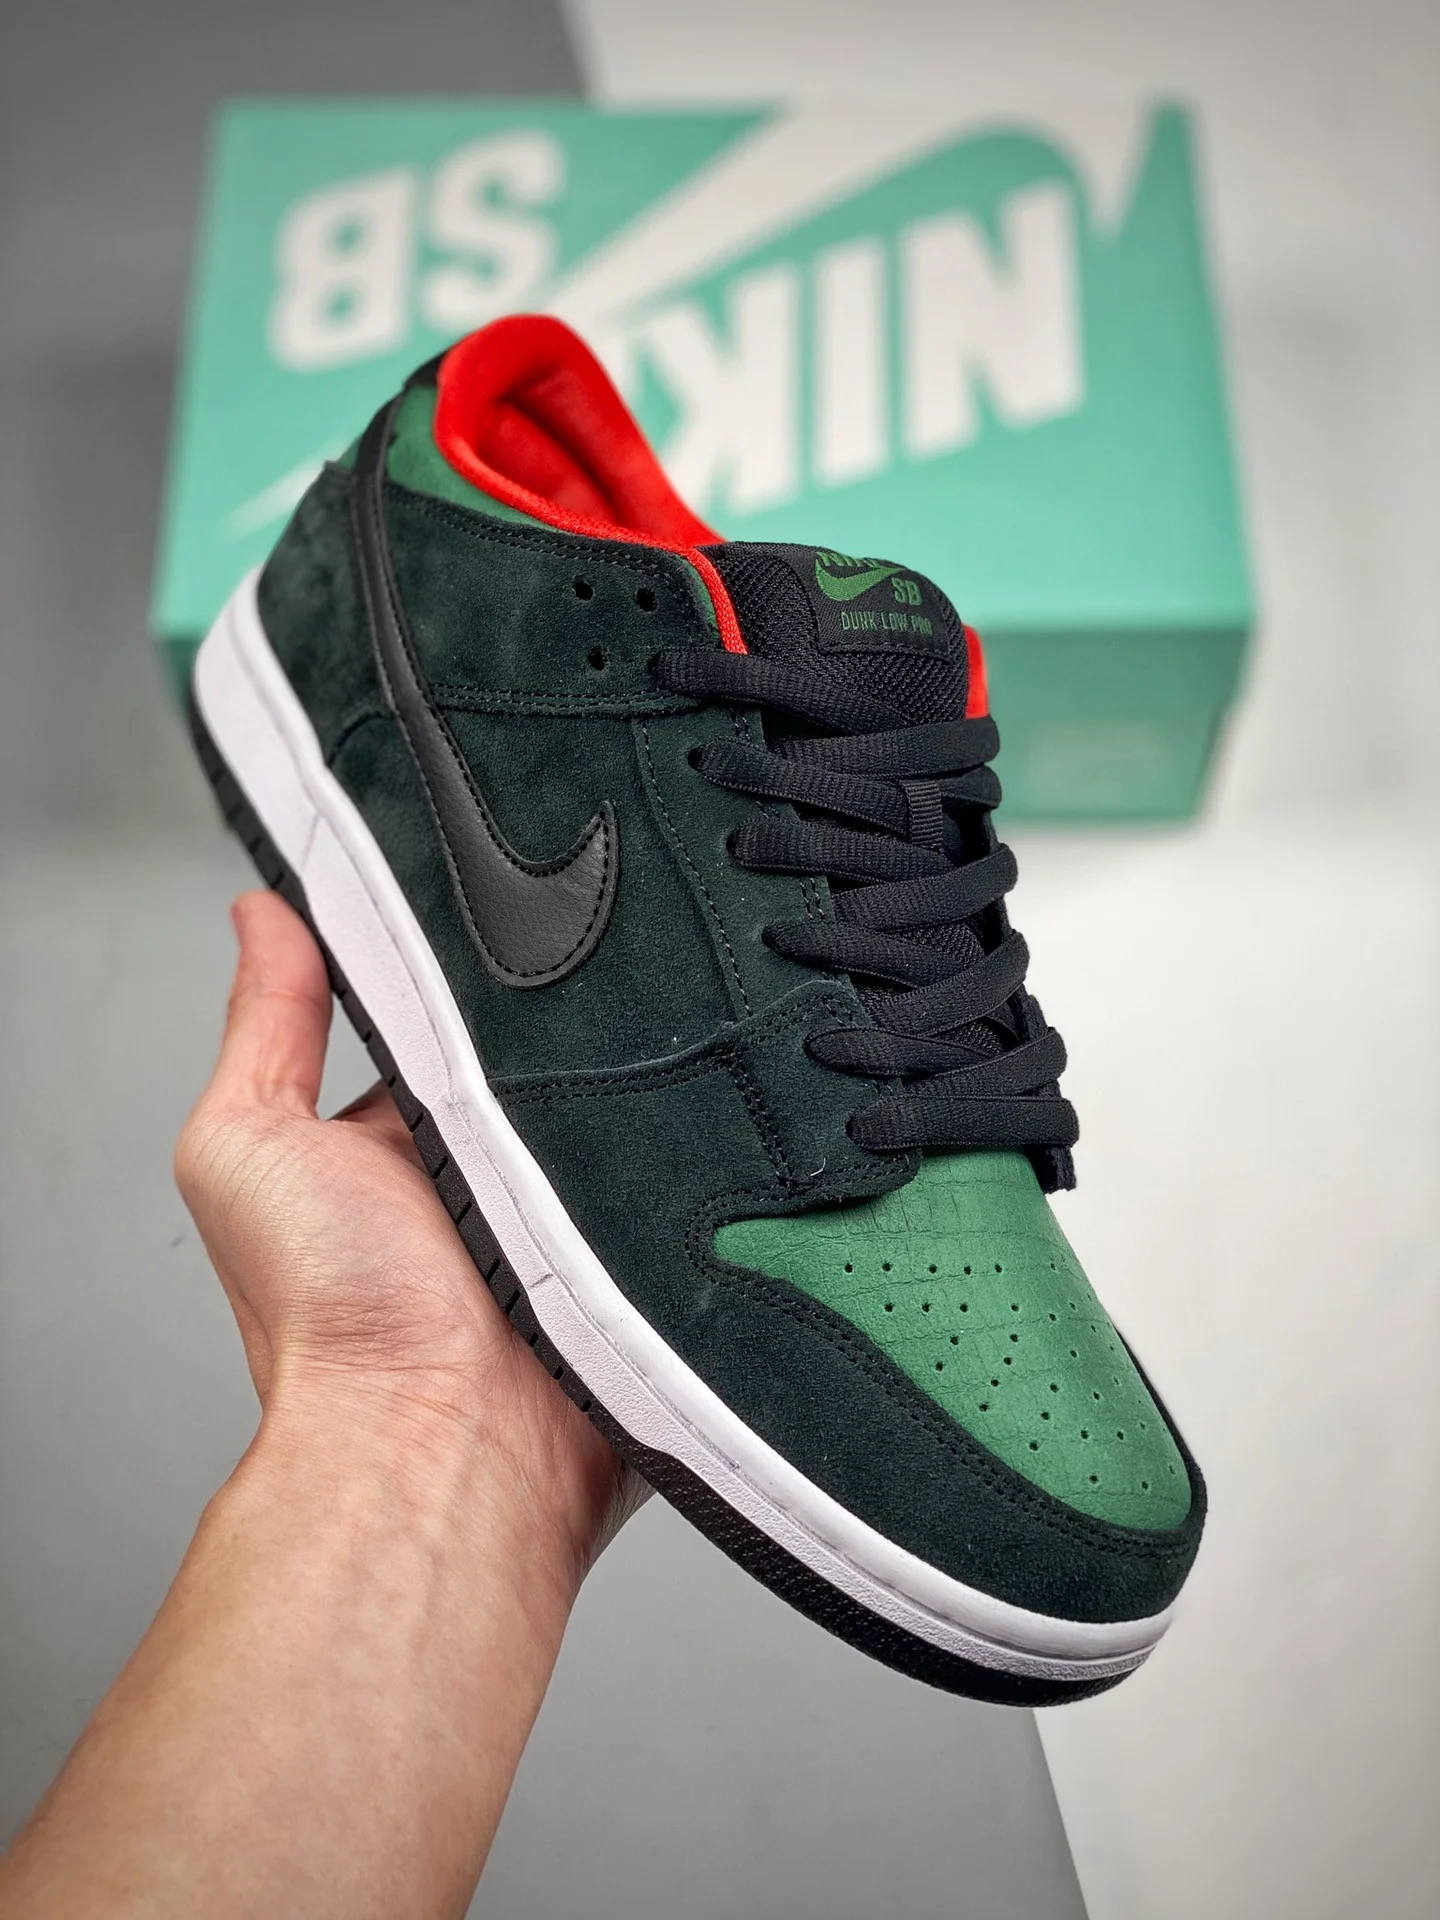 Nike SB Dunk Low Pro Reptile Black George Green For Sale